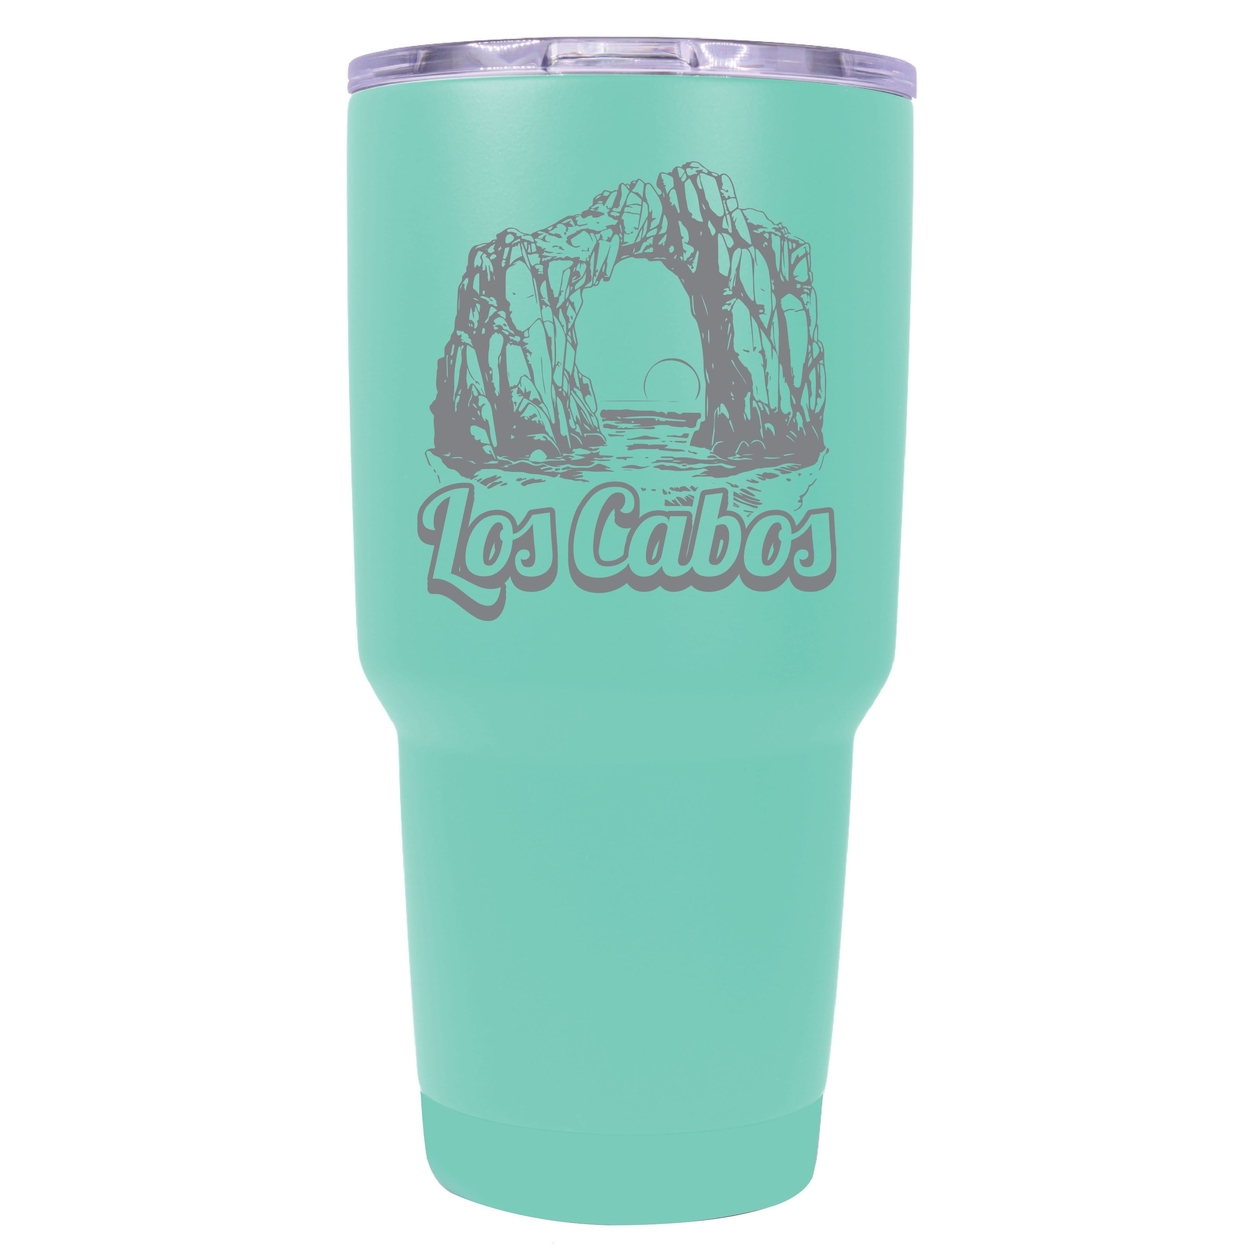 Los Cabos Mexico Souvenir 24 Oz Engraved Insulated Stainless Steel Tumbler - Red,,2-Pack